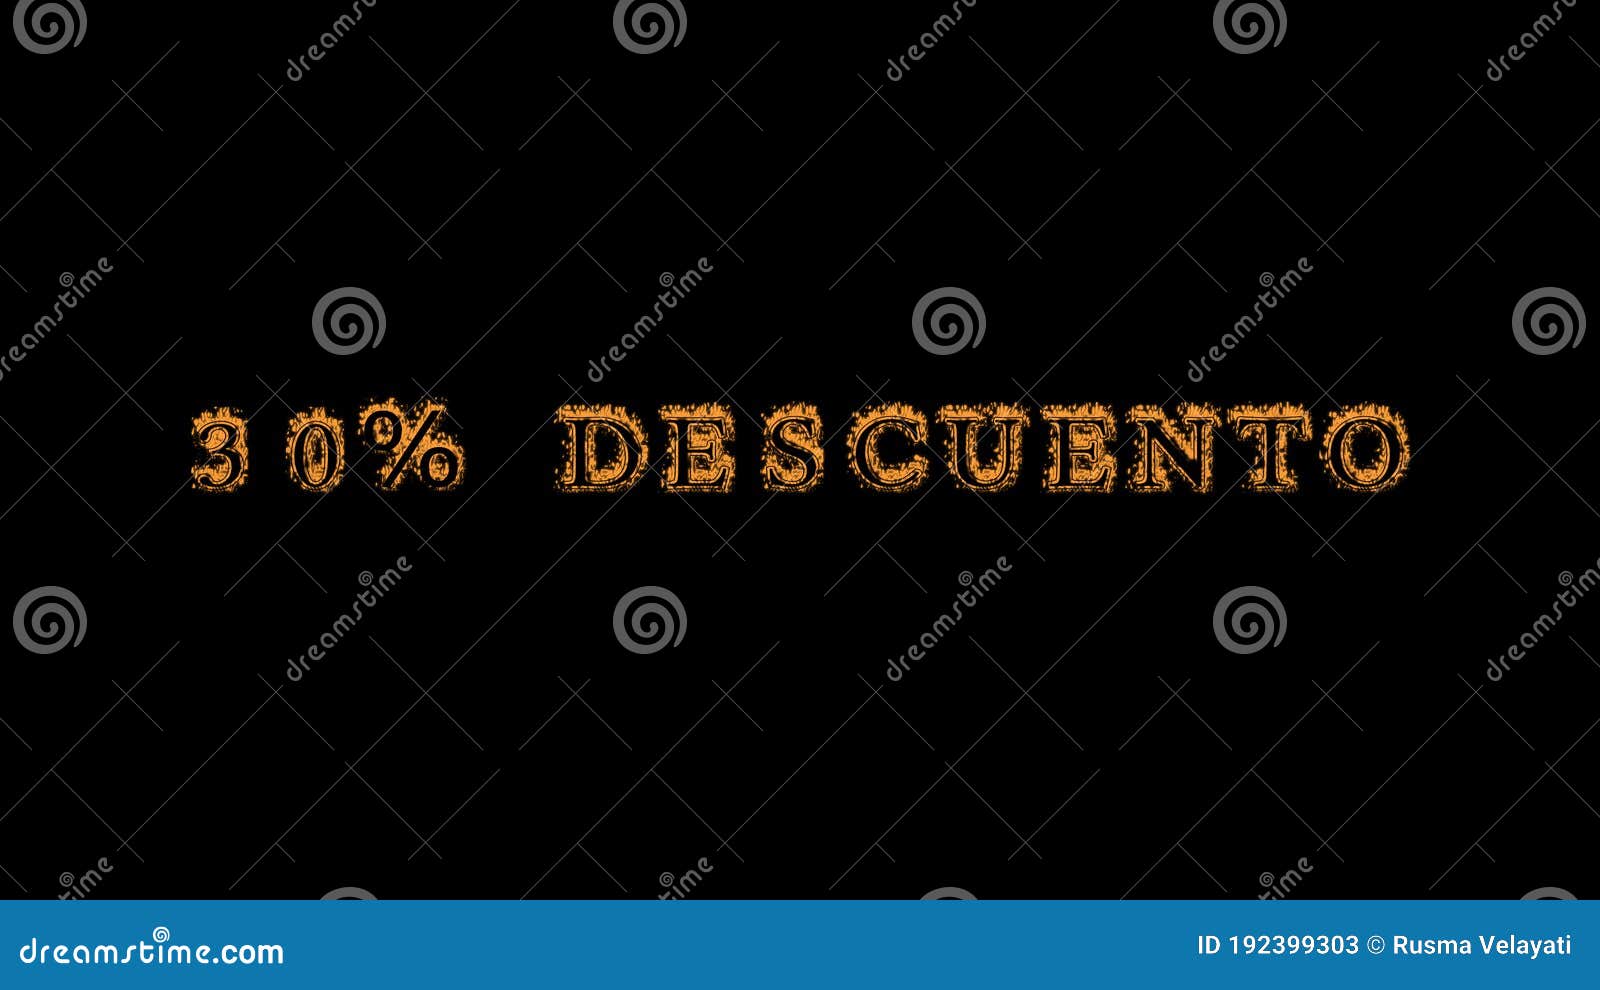 30% descuento fire text effect black background